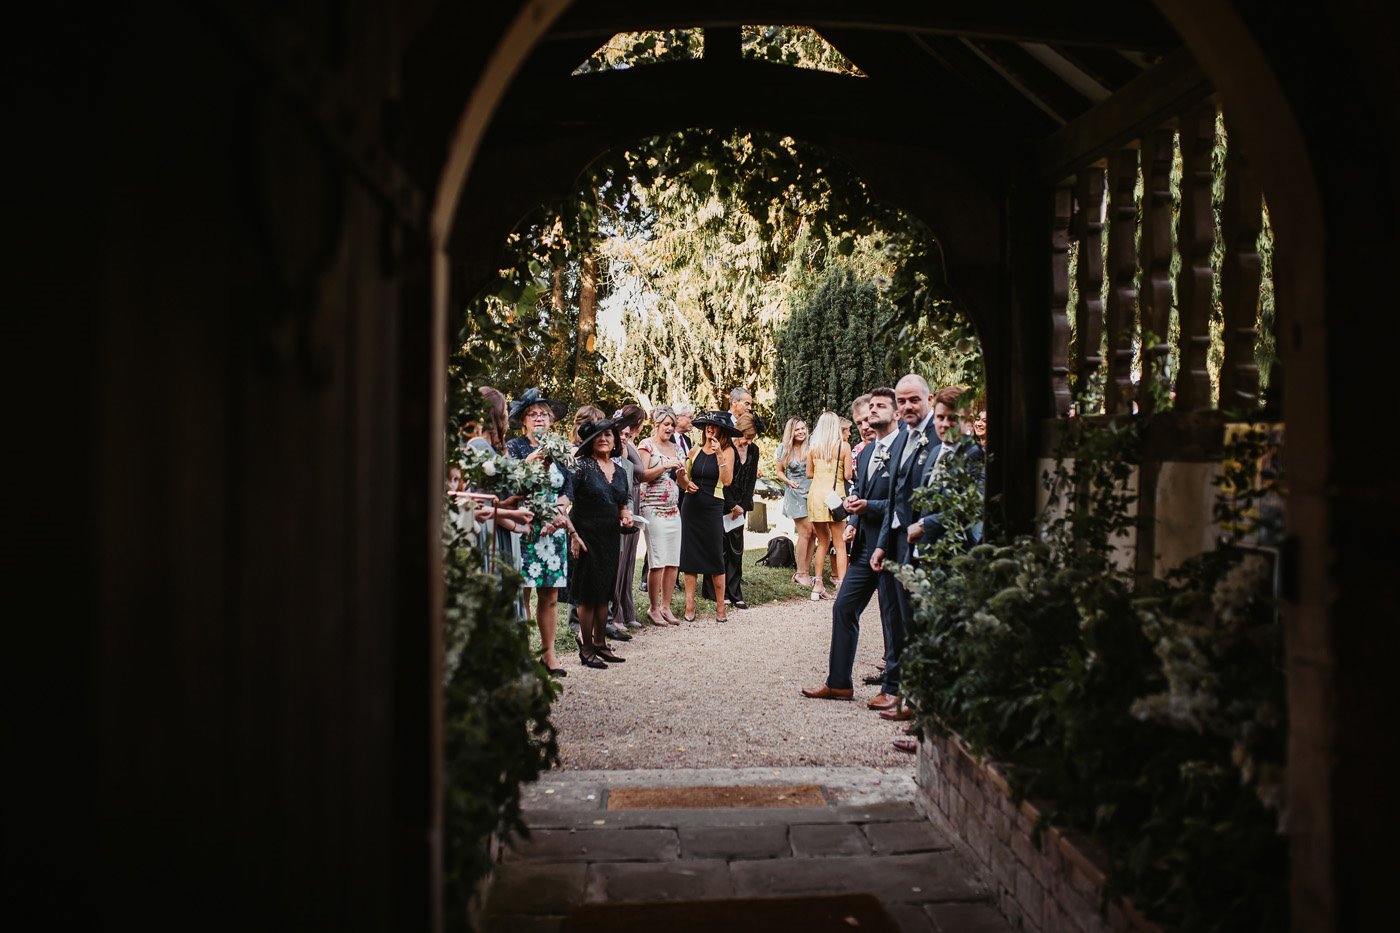 Beautiful church doorway looks out to guests waiting to throw confetti at a wedding in the uk